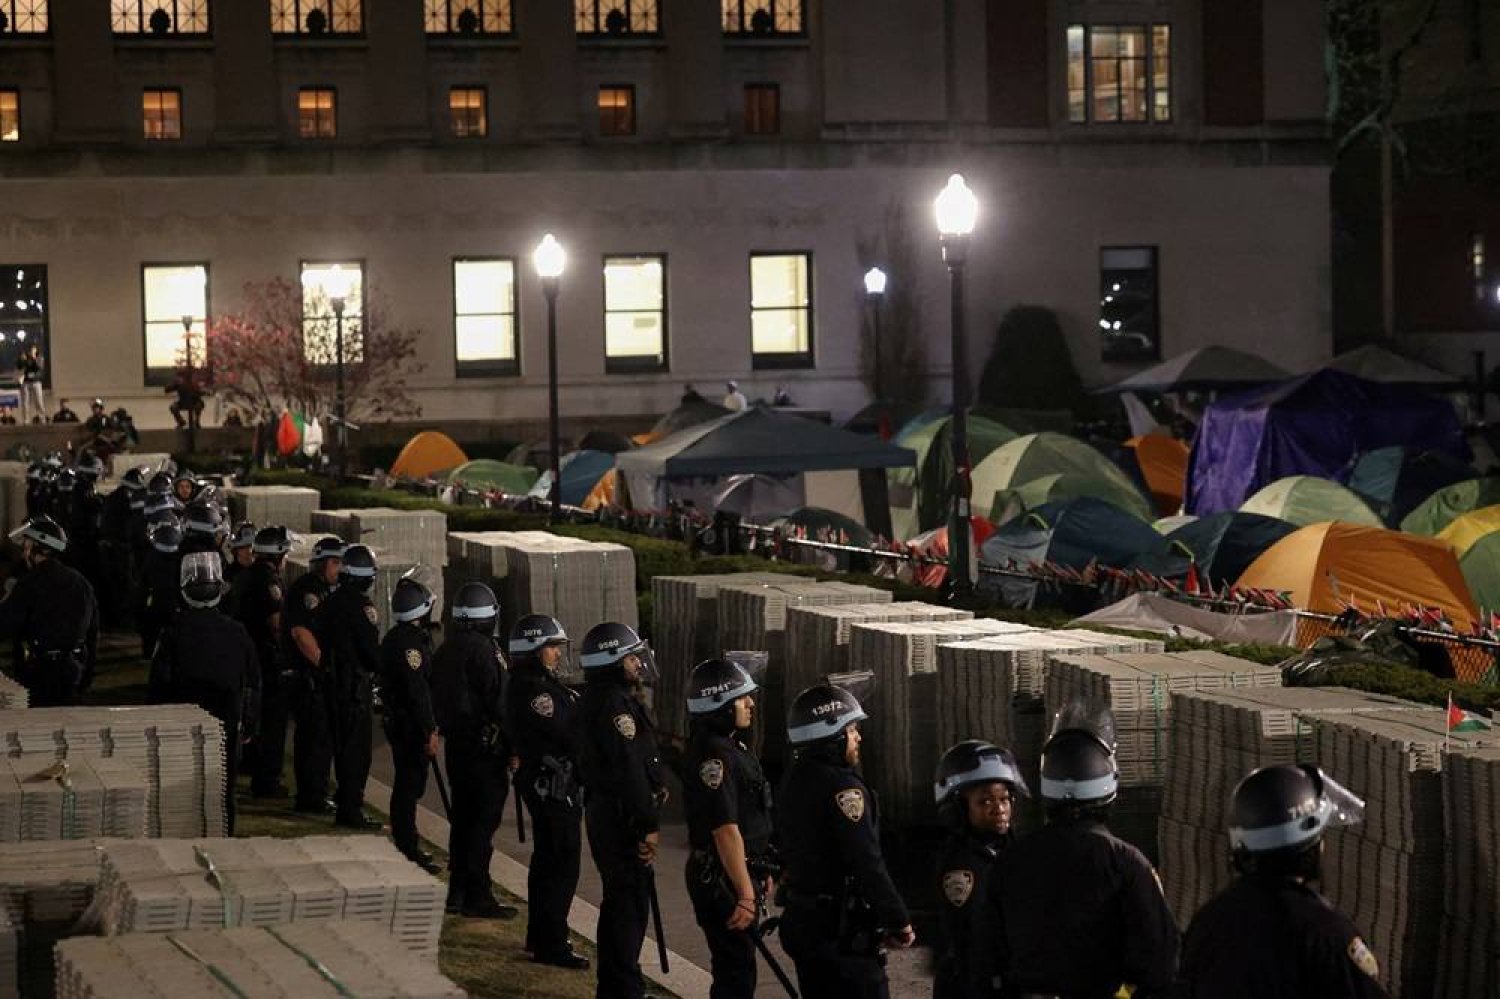 Police stand guard near an encampment of protesters supporting Palestinians on the grounds of Columbia University, during the ongoing conflict between Israel and the Palestinian group Hamas, in New York City, US, April 30, 2024. (Reuters)